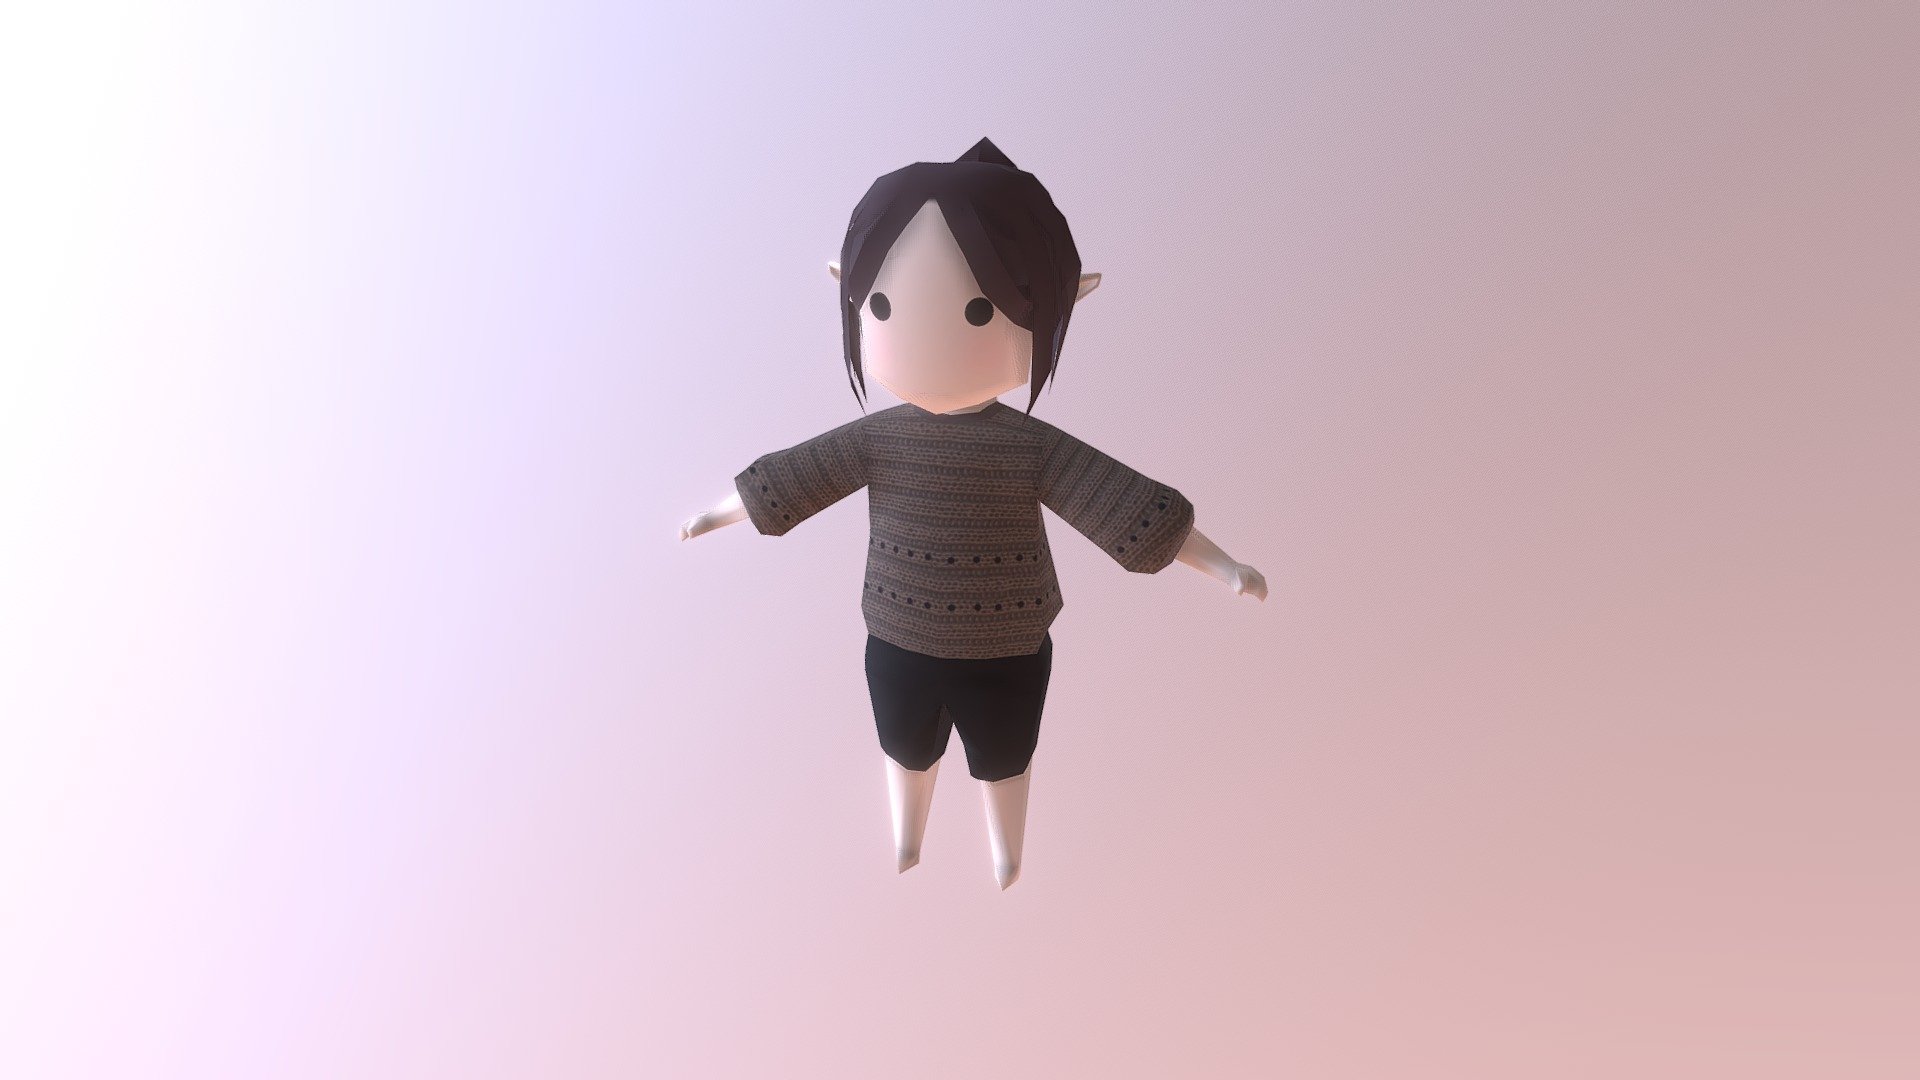 Low poly chibi/cartoon character which I made while practicing Blender 3d model